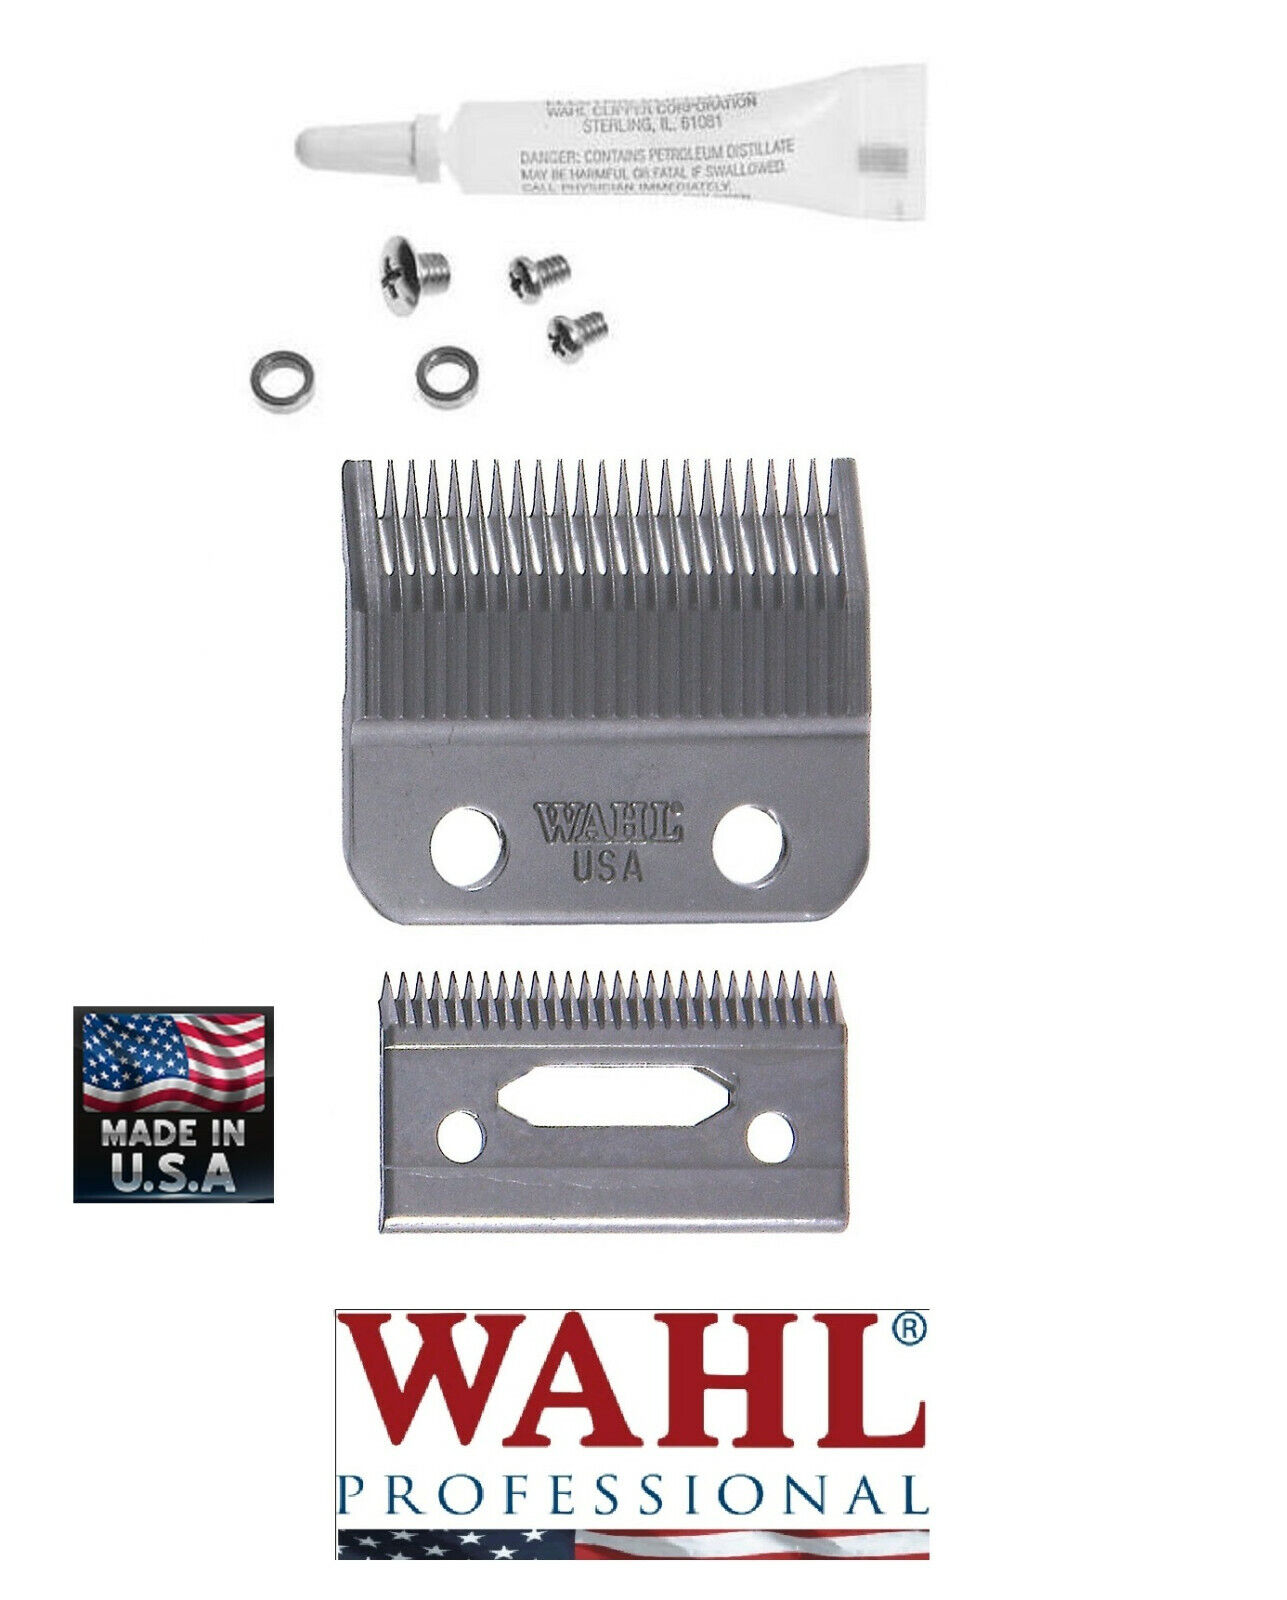 Wahl Professional Taper 2000 Adjustable Cut Clipper #8472-700 Assorted Color Blade Attachments